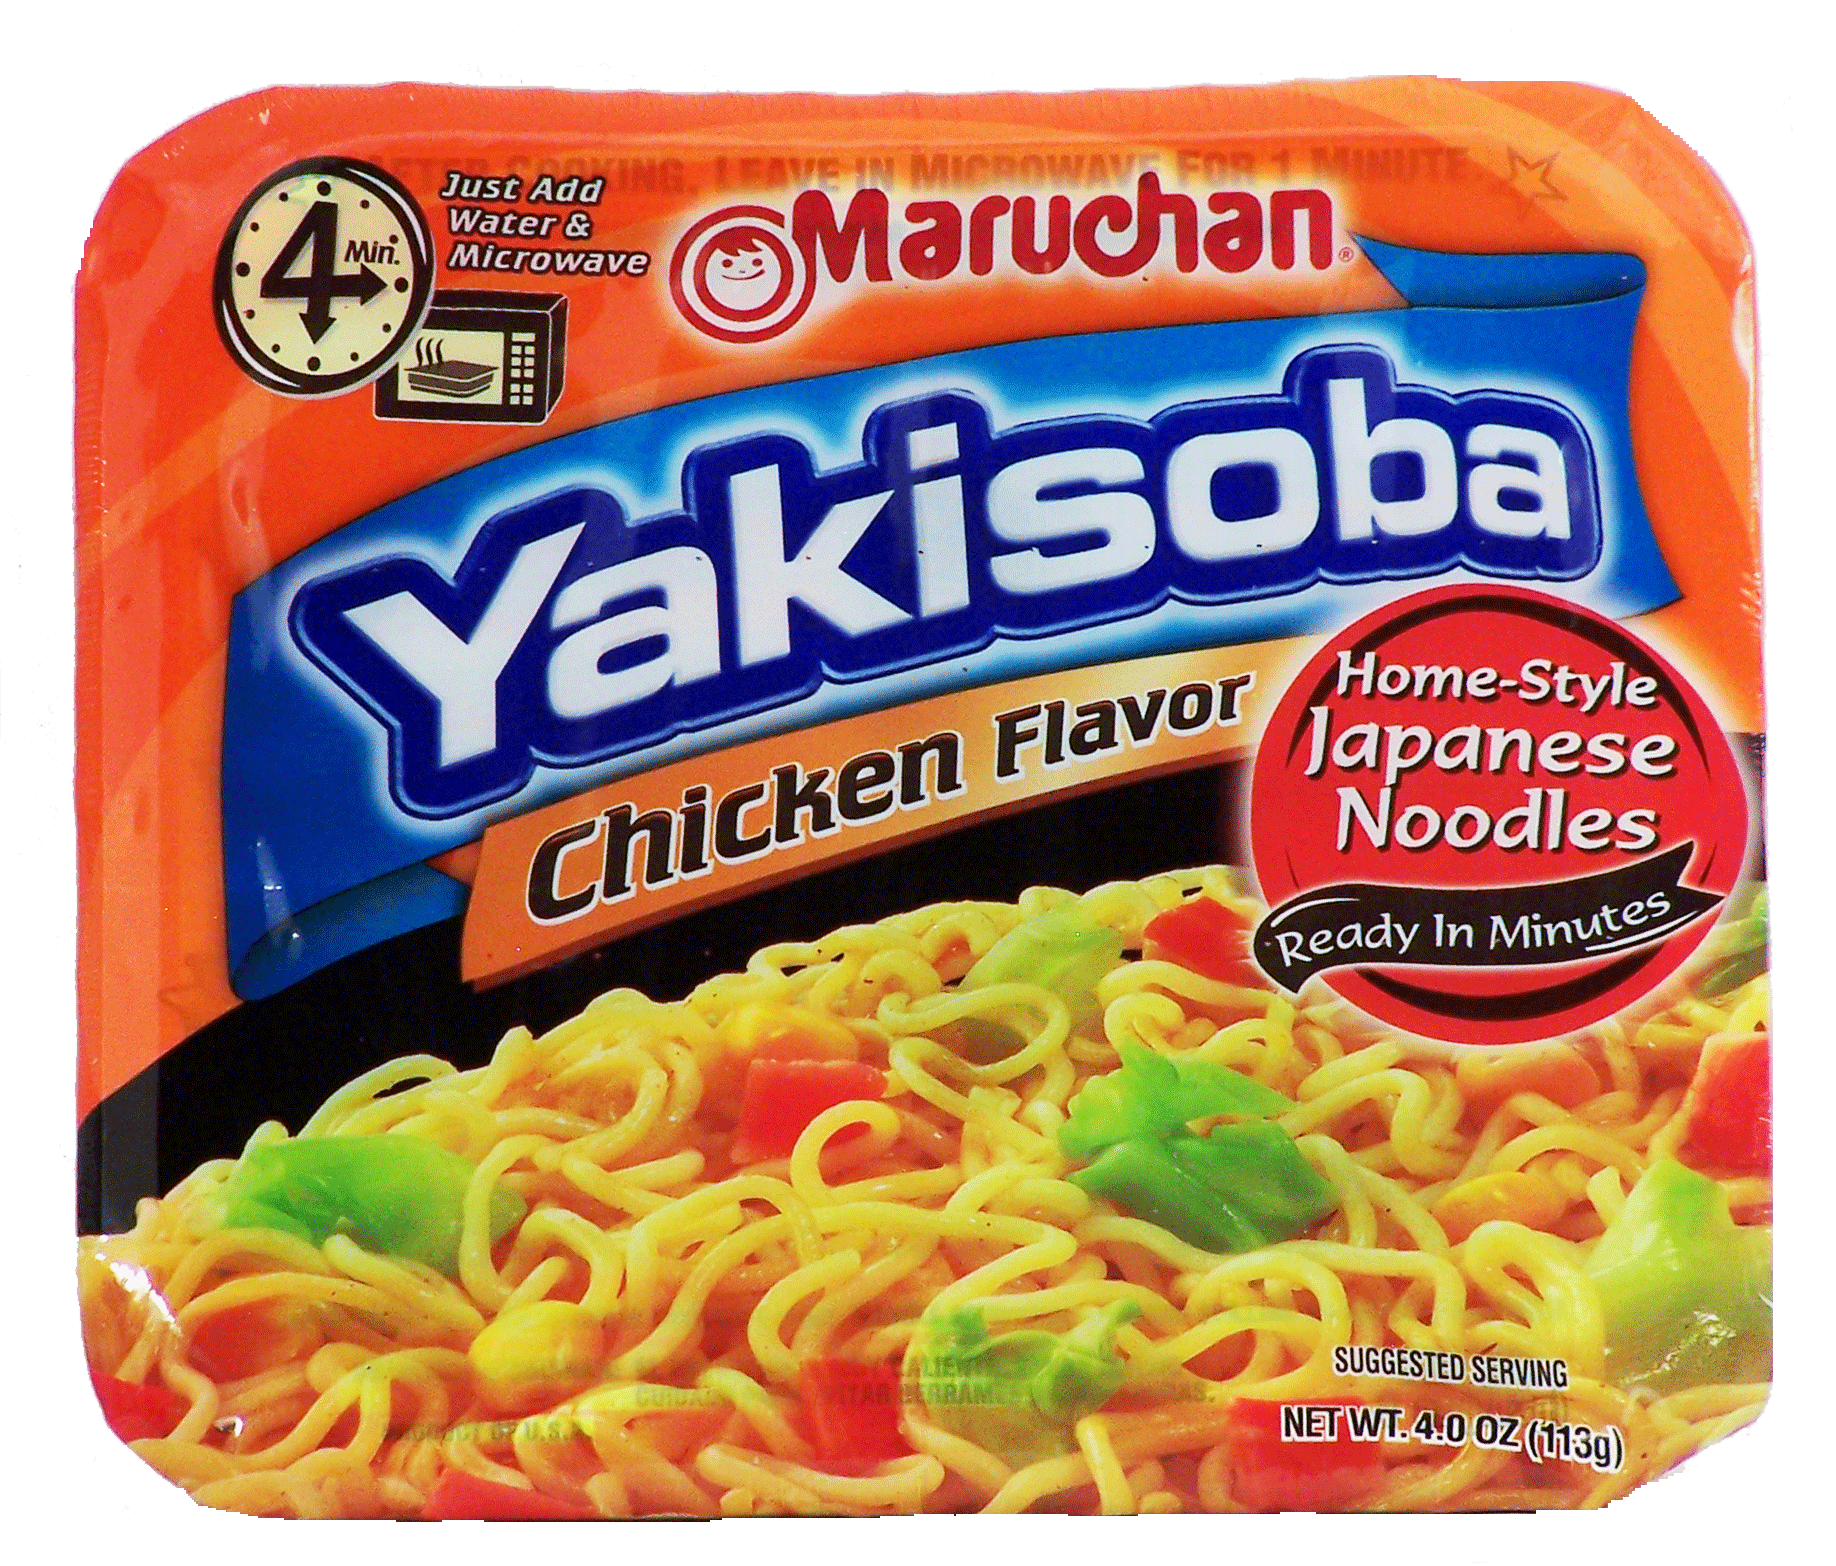 Maruchan Yakisoba chicken flavor, home-style japanese noodles Full-Size Picture